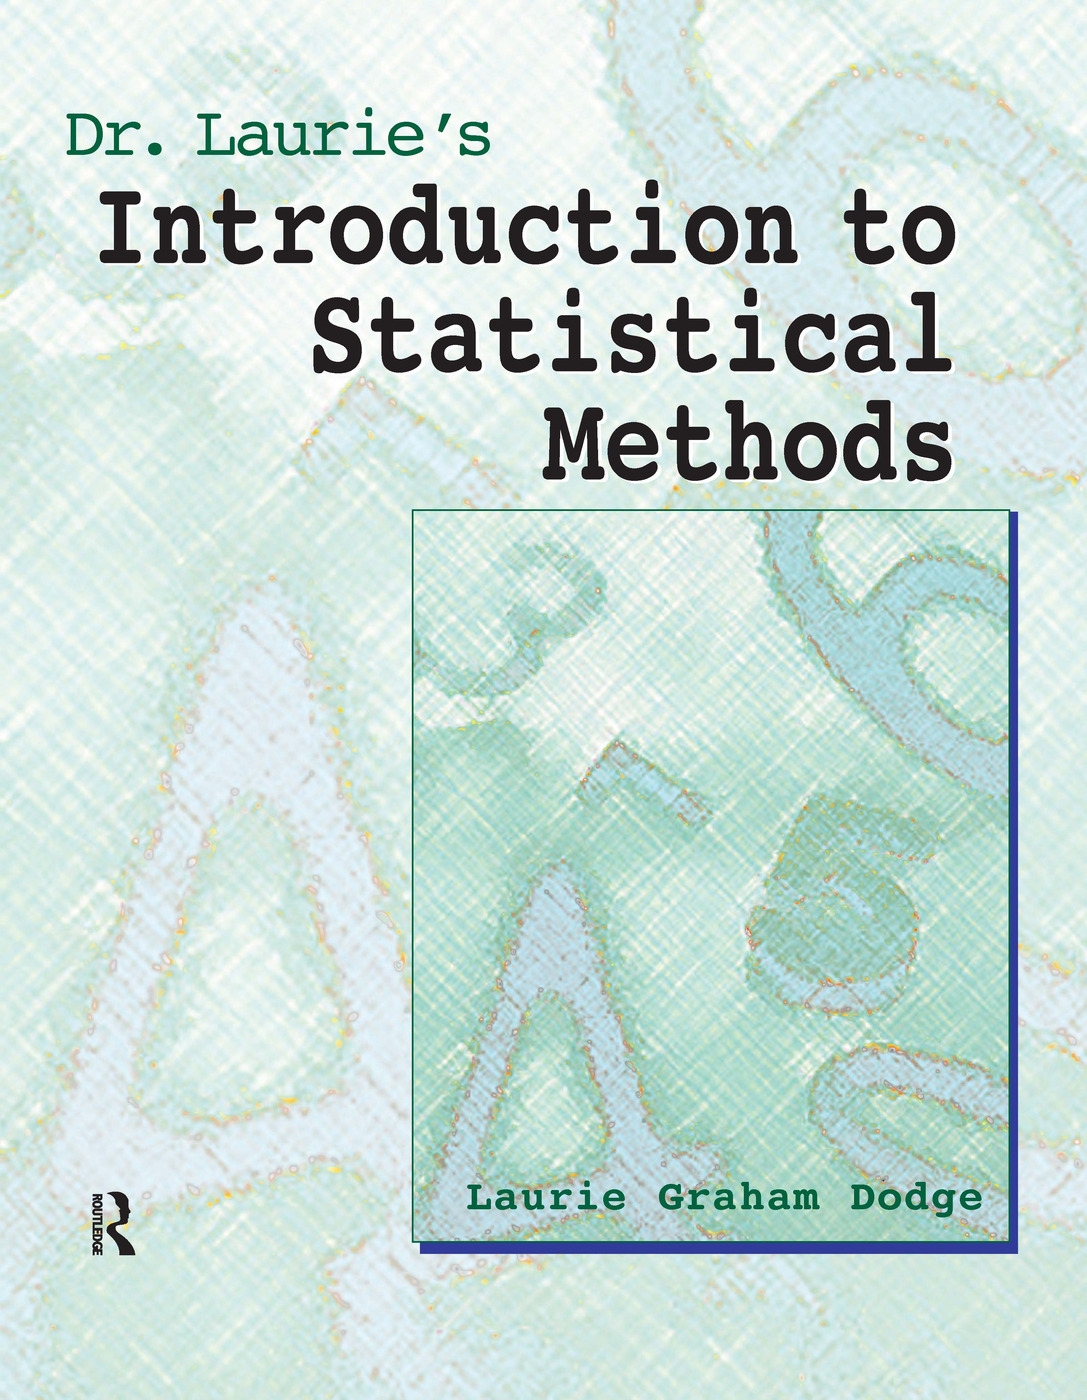 Dr. Laurie’s Introduction to Statistical Methods